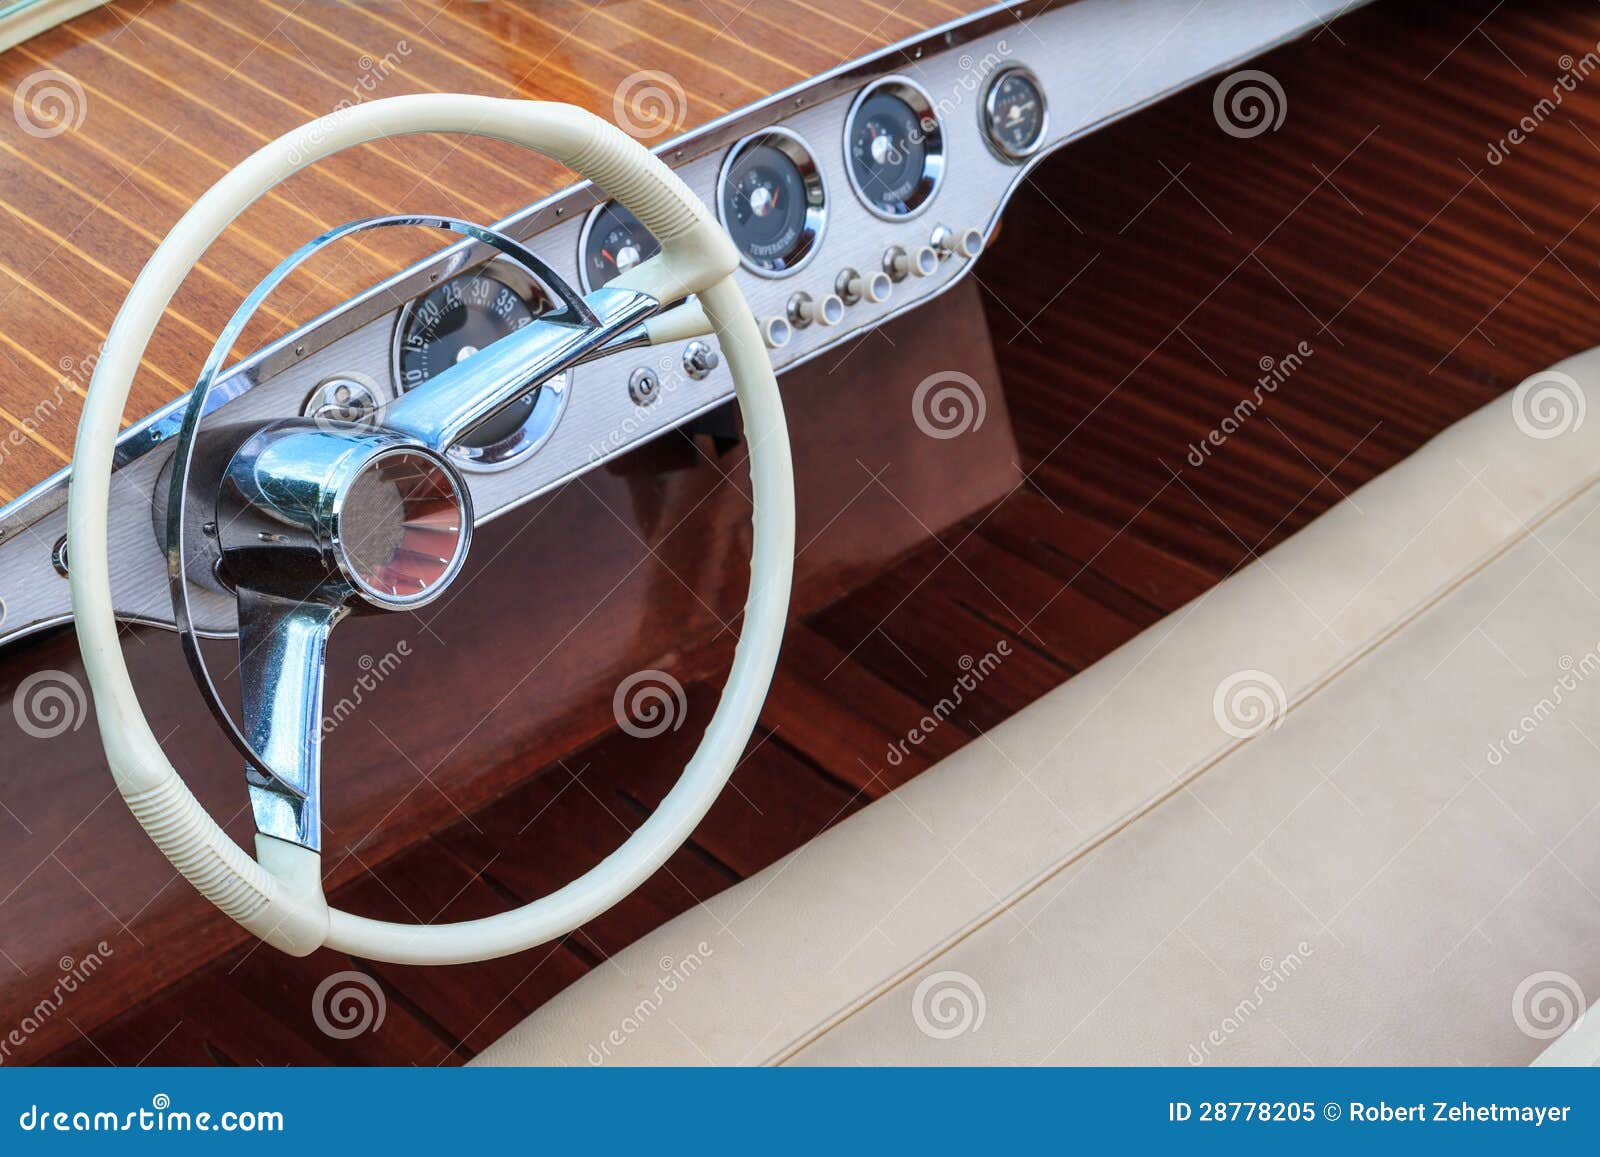 Luxury Wooden Motor Boat - Steering Wheel And Leather ...